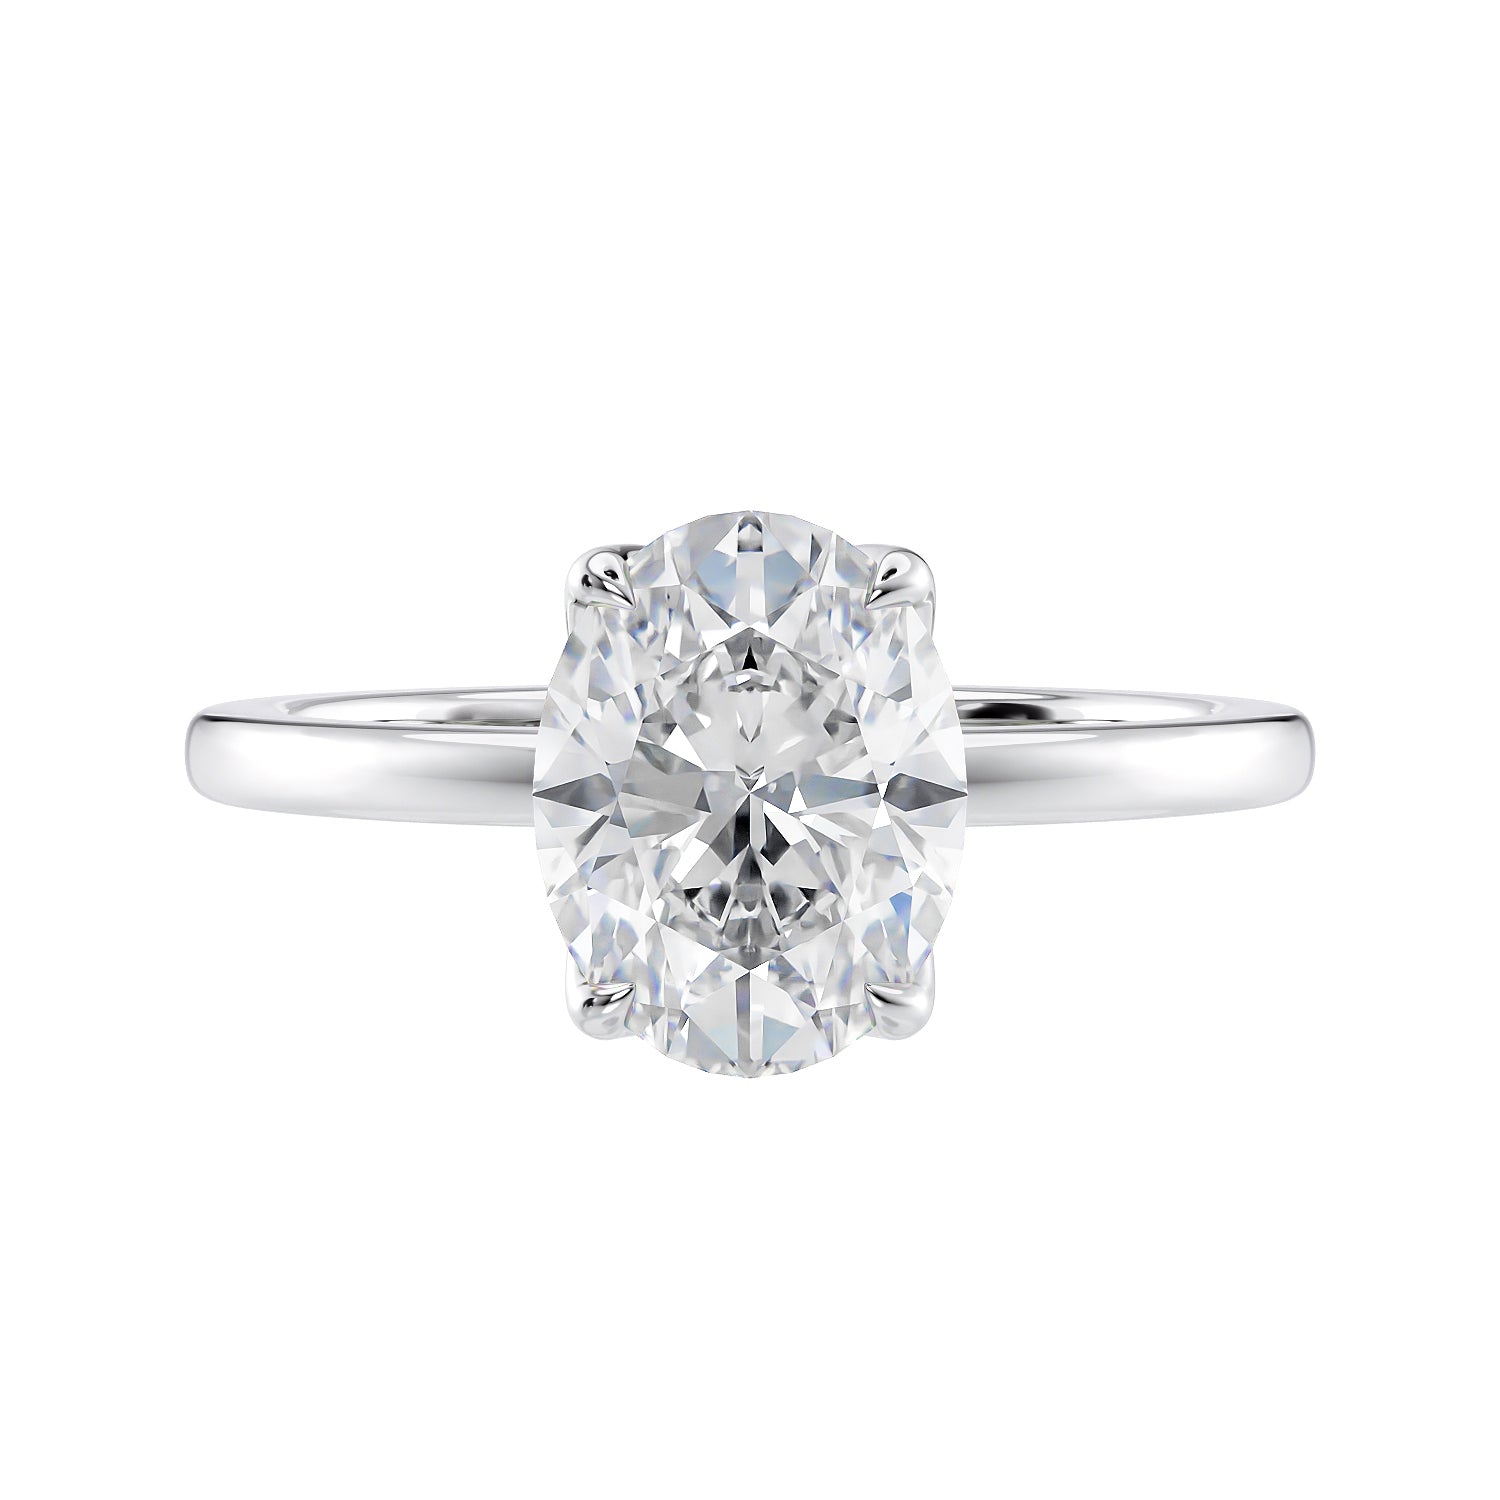 Lab grown oval diamond solitaire engagement ring with contemporary setting white gold front view.